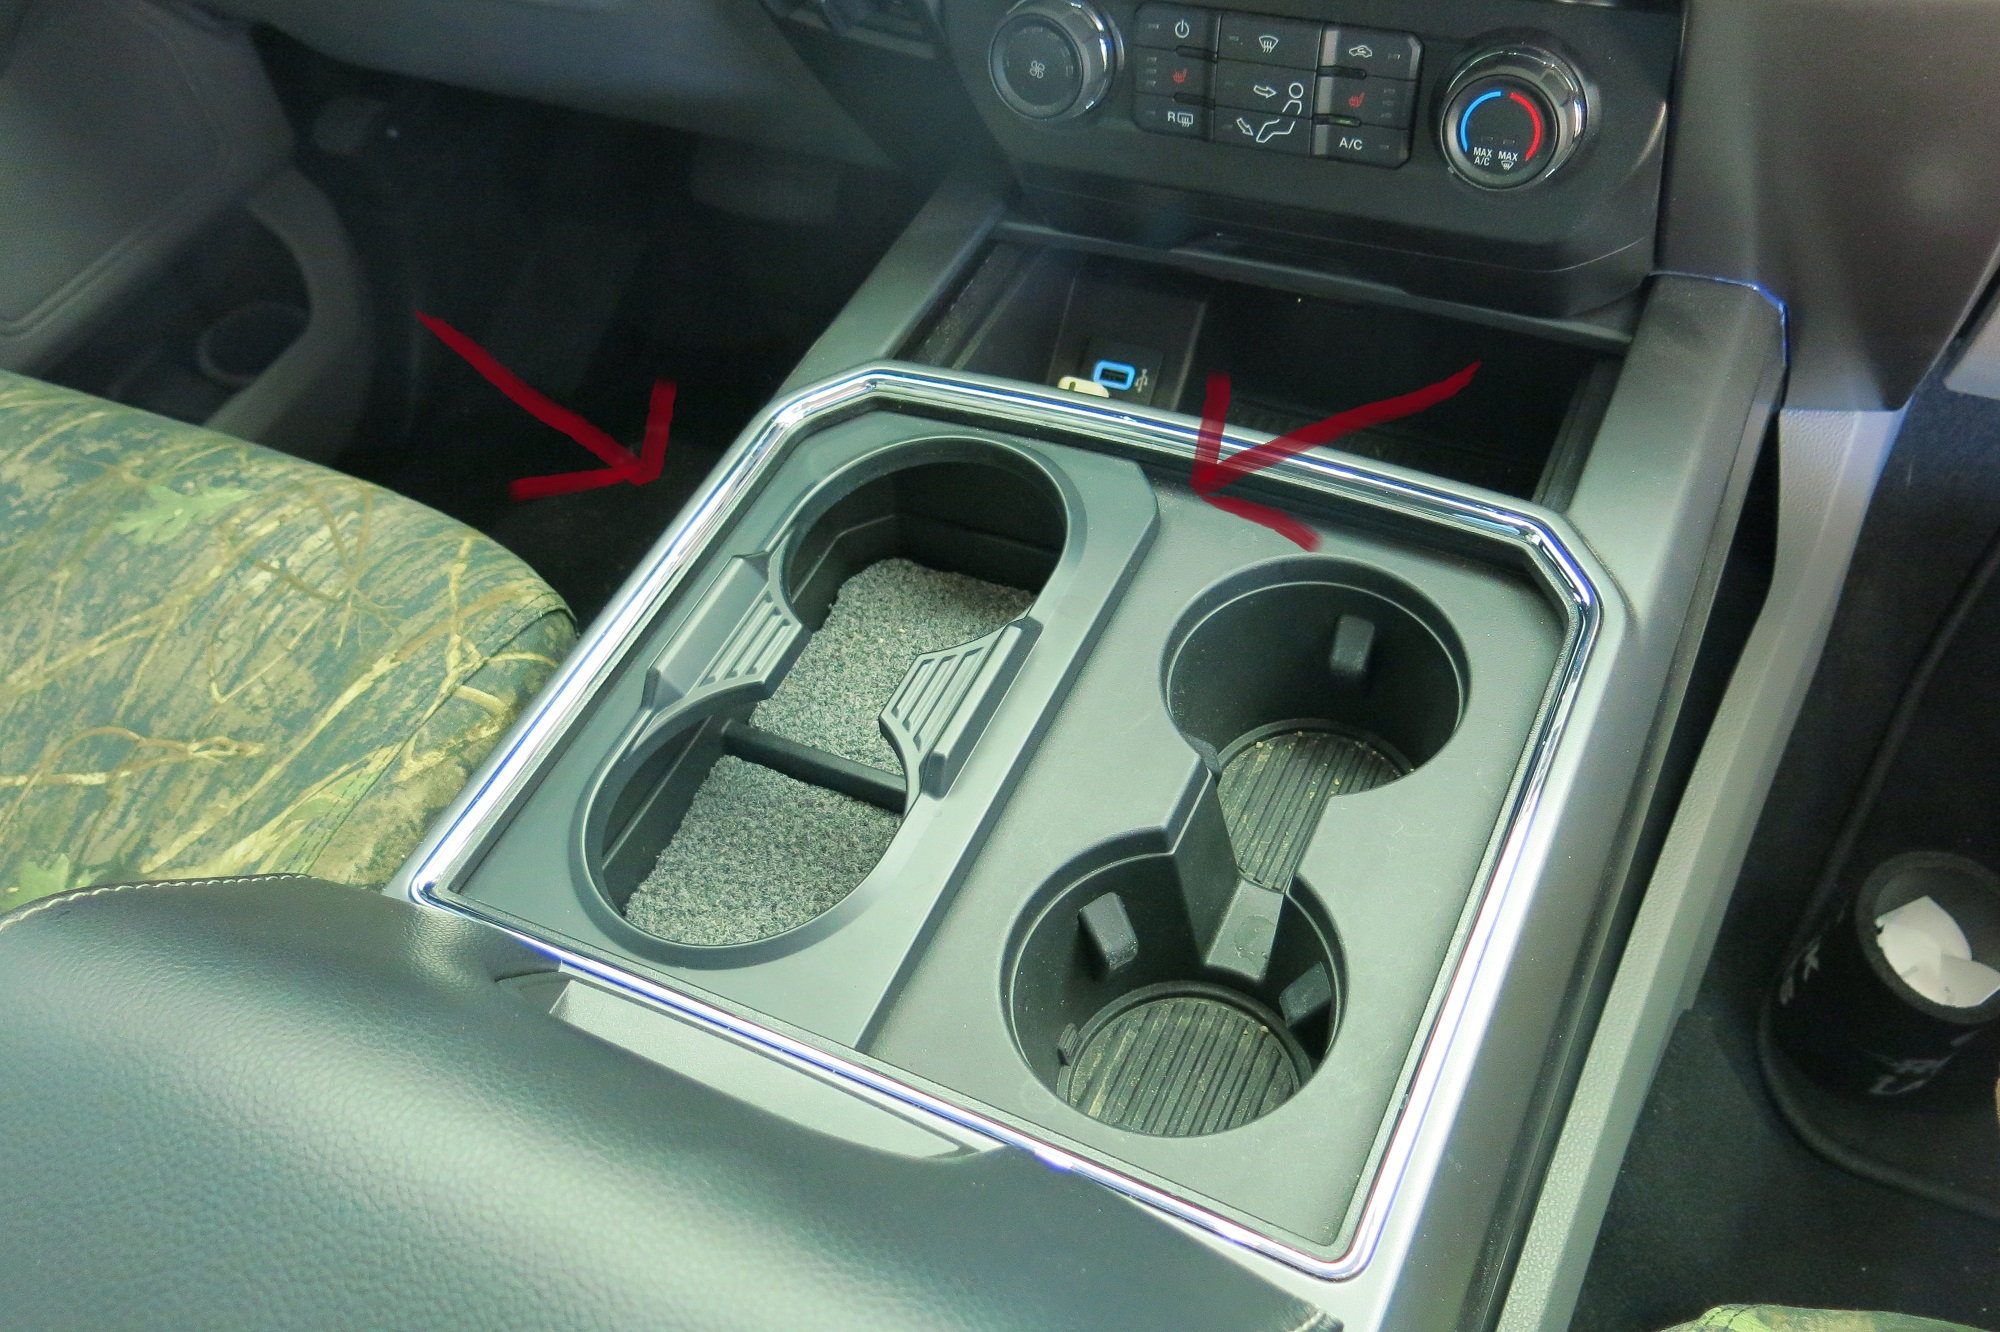 Console Cup Holder Inserts - Ford Truck Enthusiasts Forums